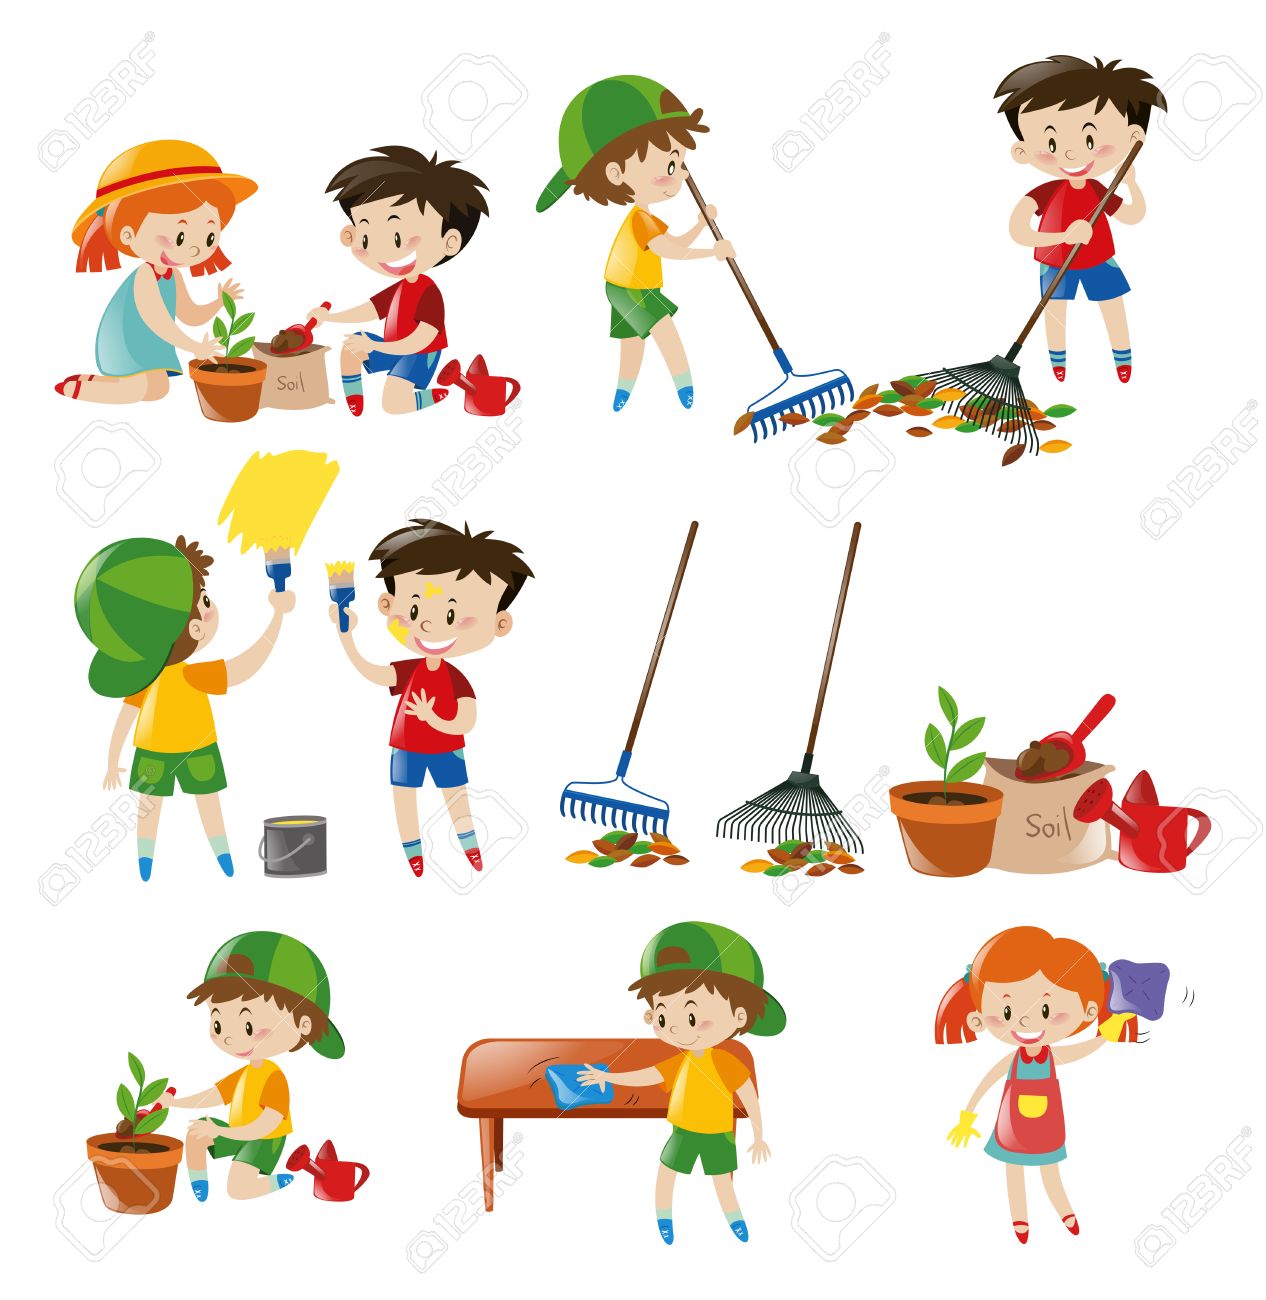 children-s-chores-clipart-20-free-cliparts-download-images-on